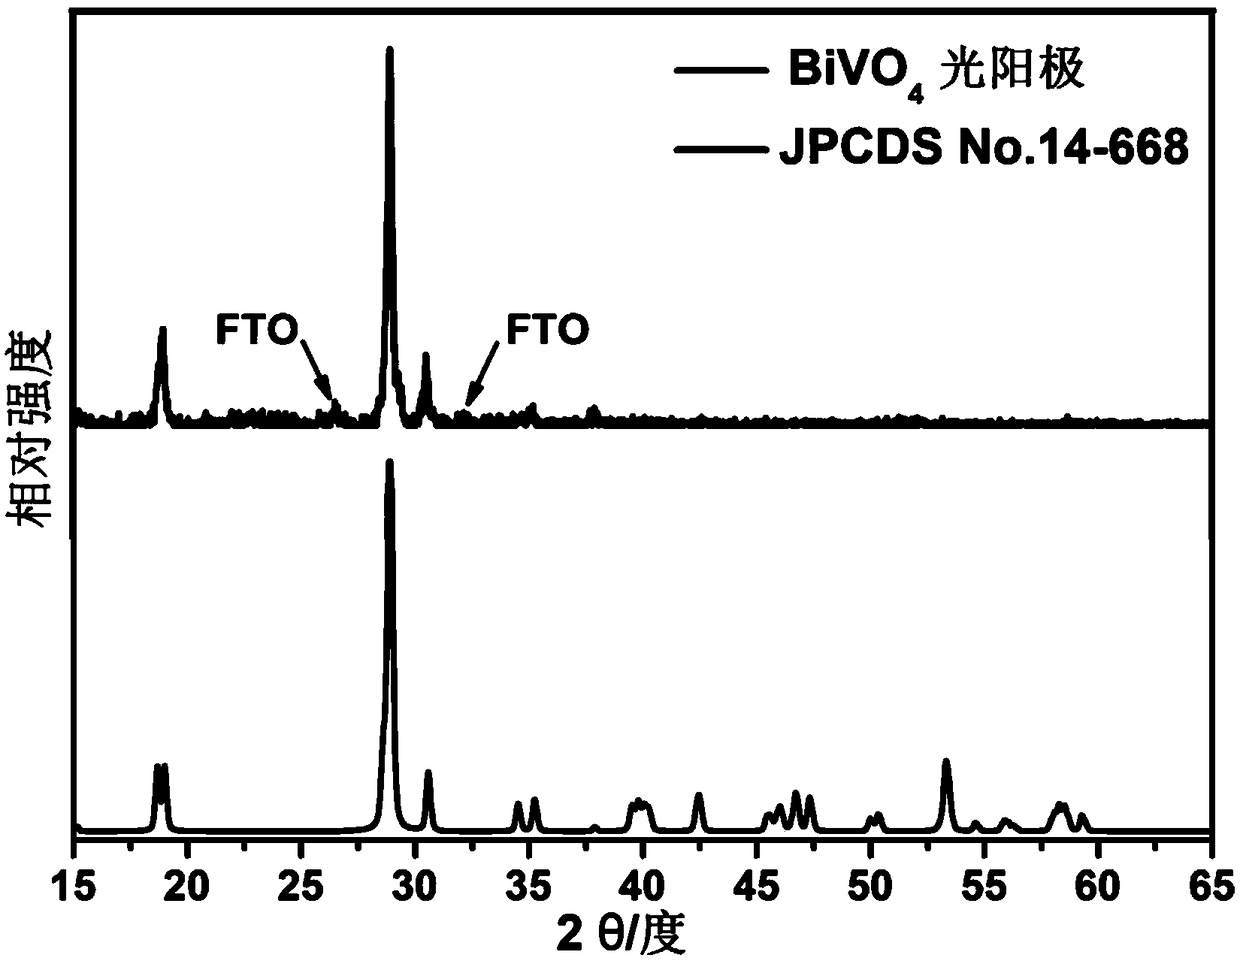 Large-size nano-porous BiVO4 photo-anode as well as preparation method and application thereof